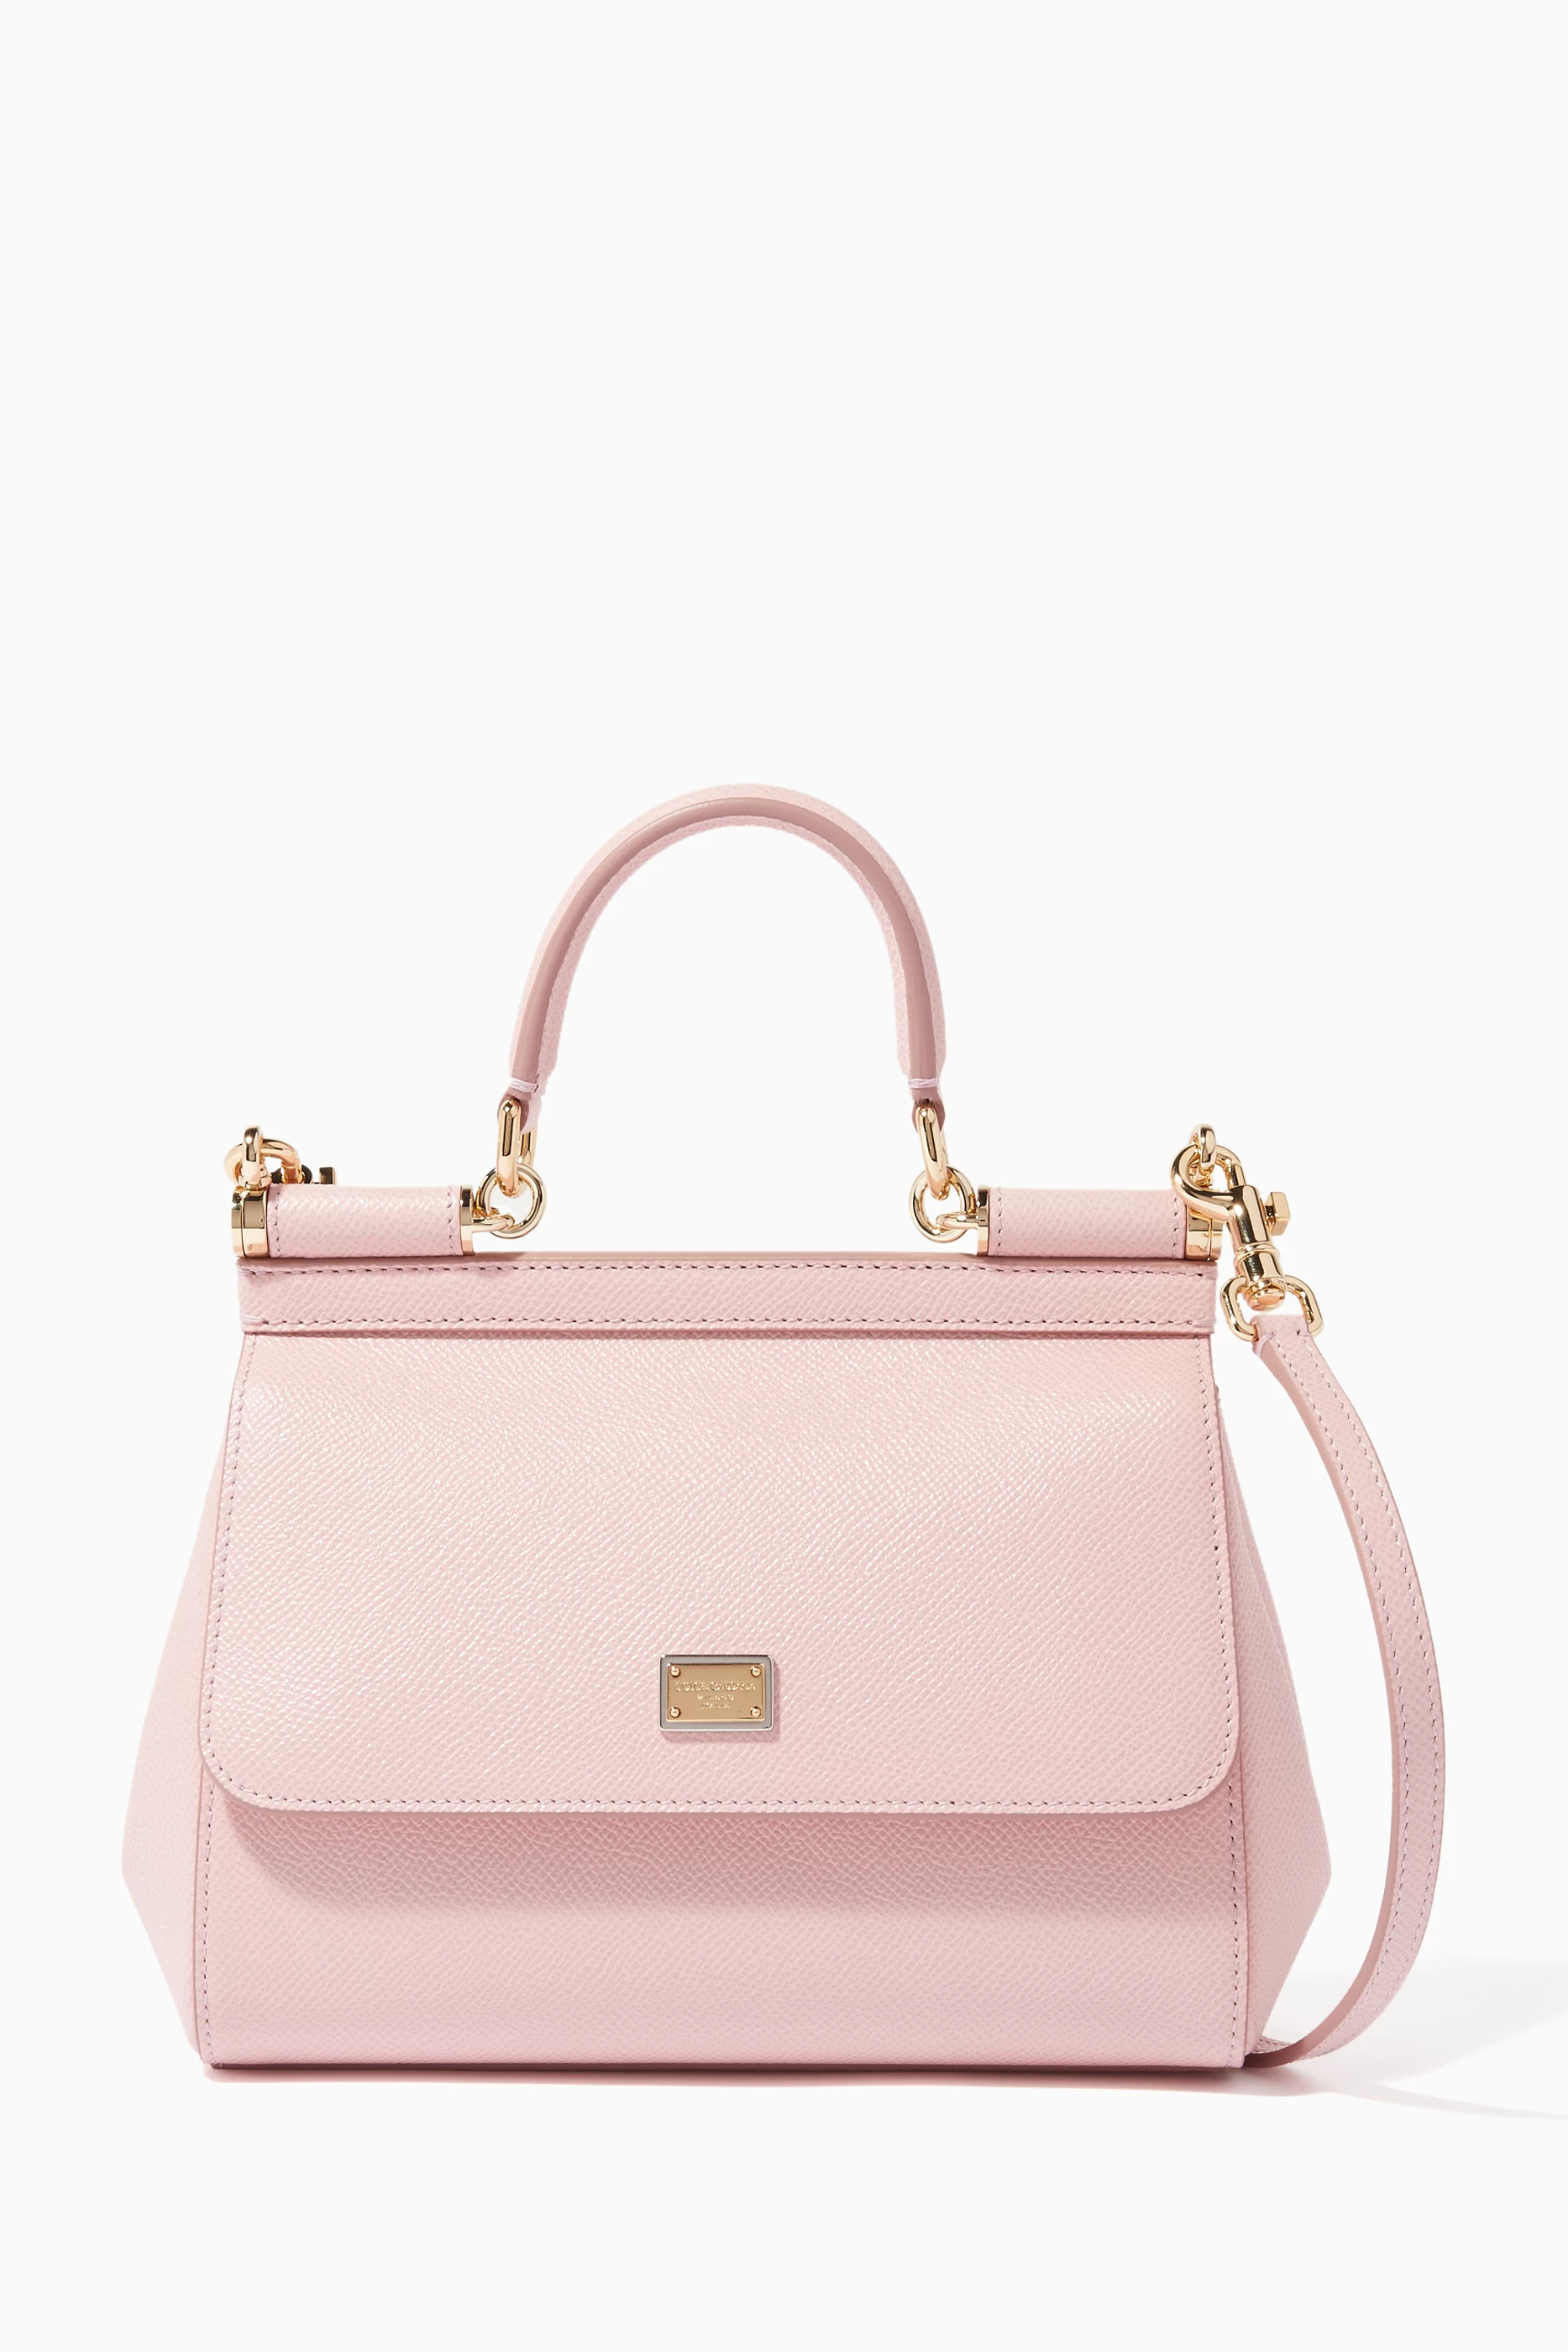 Dolce & Gabbana Small Sicily Bag In Dauphine Leather